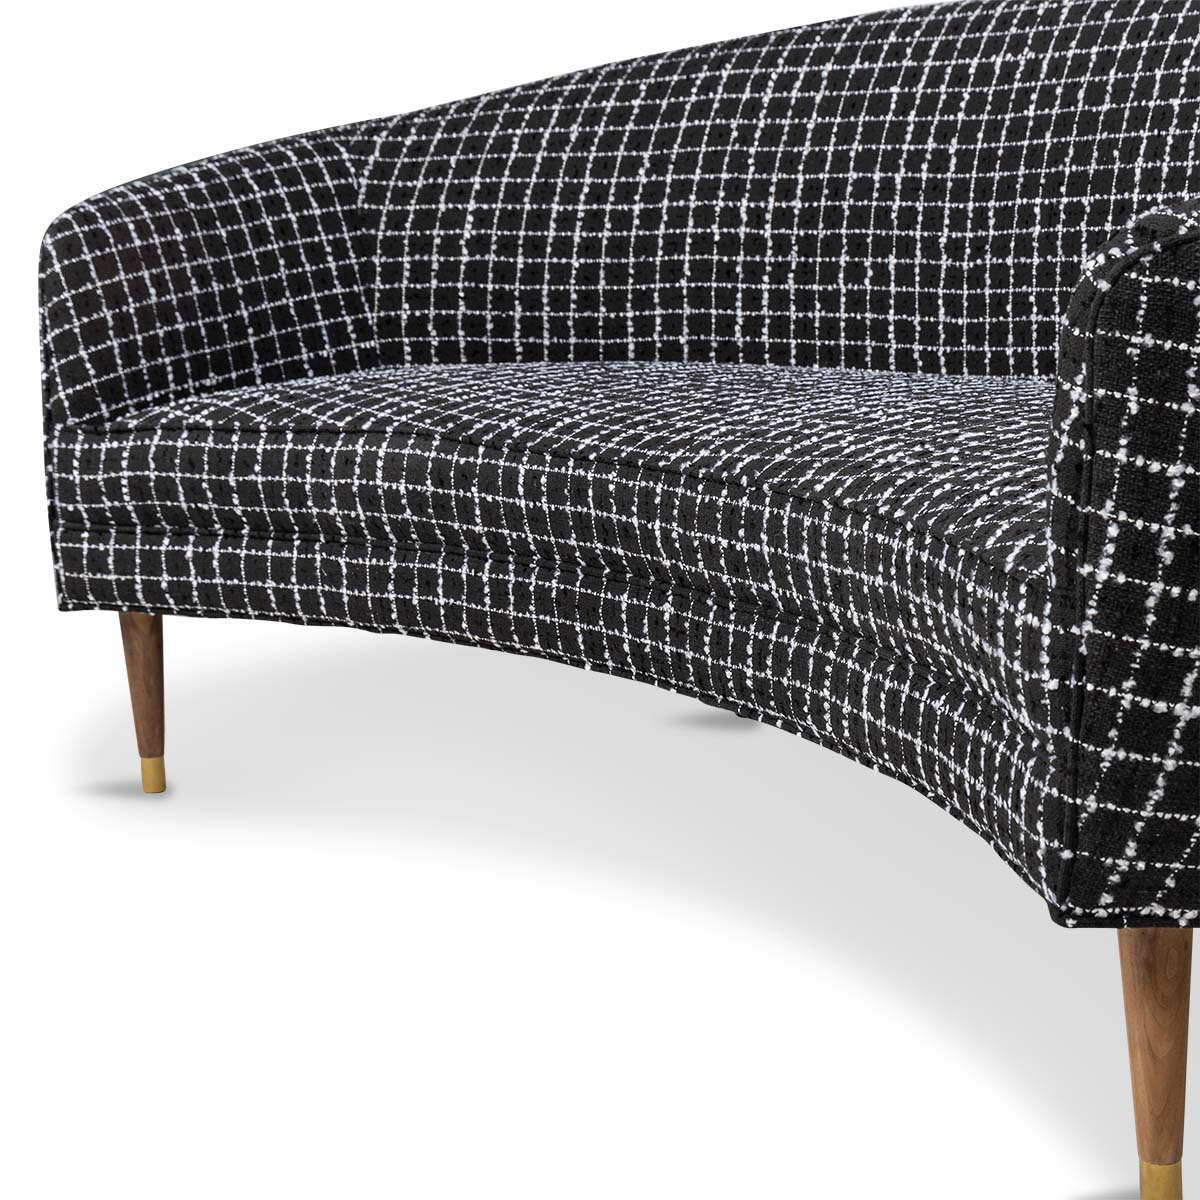 Art Deco Petite Sofa in Knit Black Linen with Oiled Walnut and Brushed Brass Legs